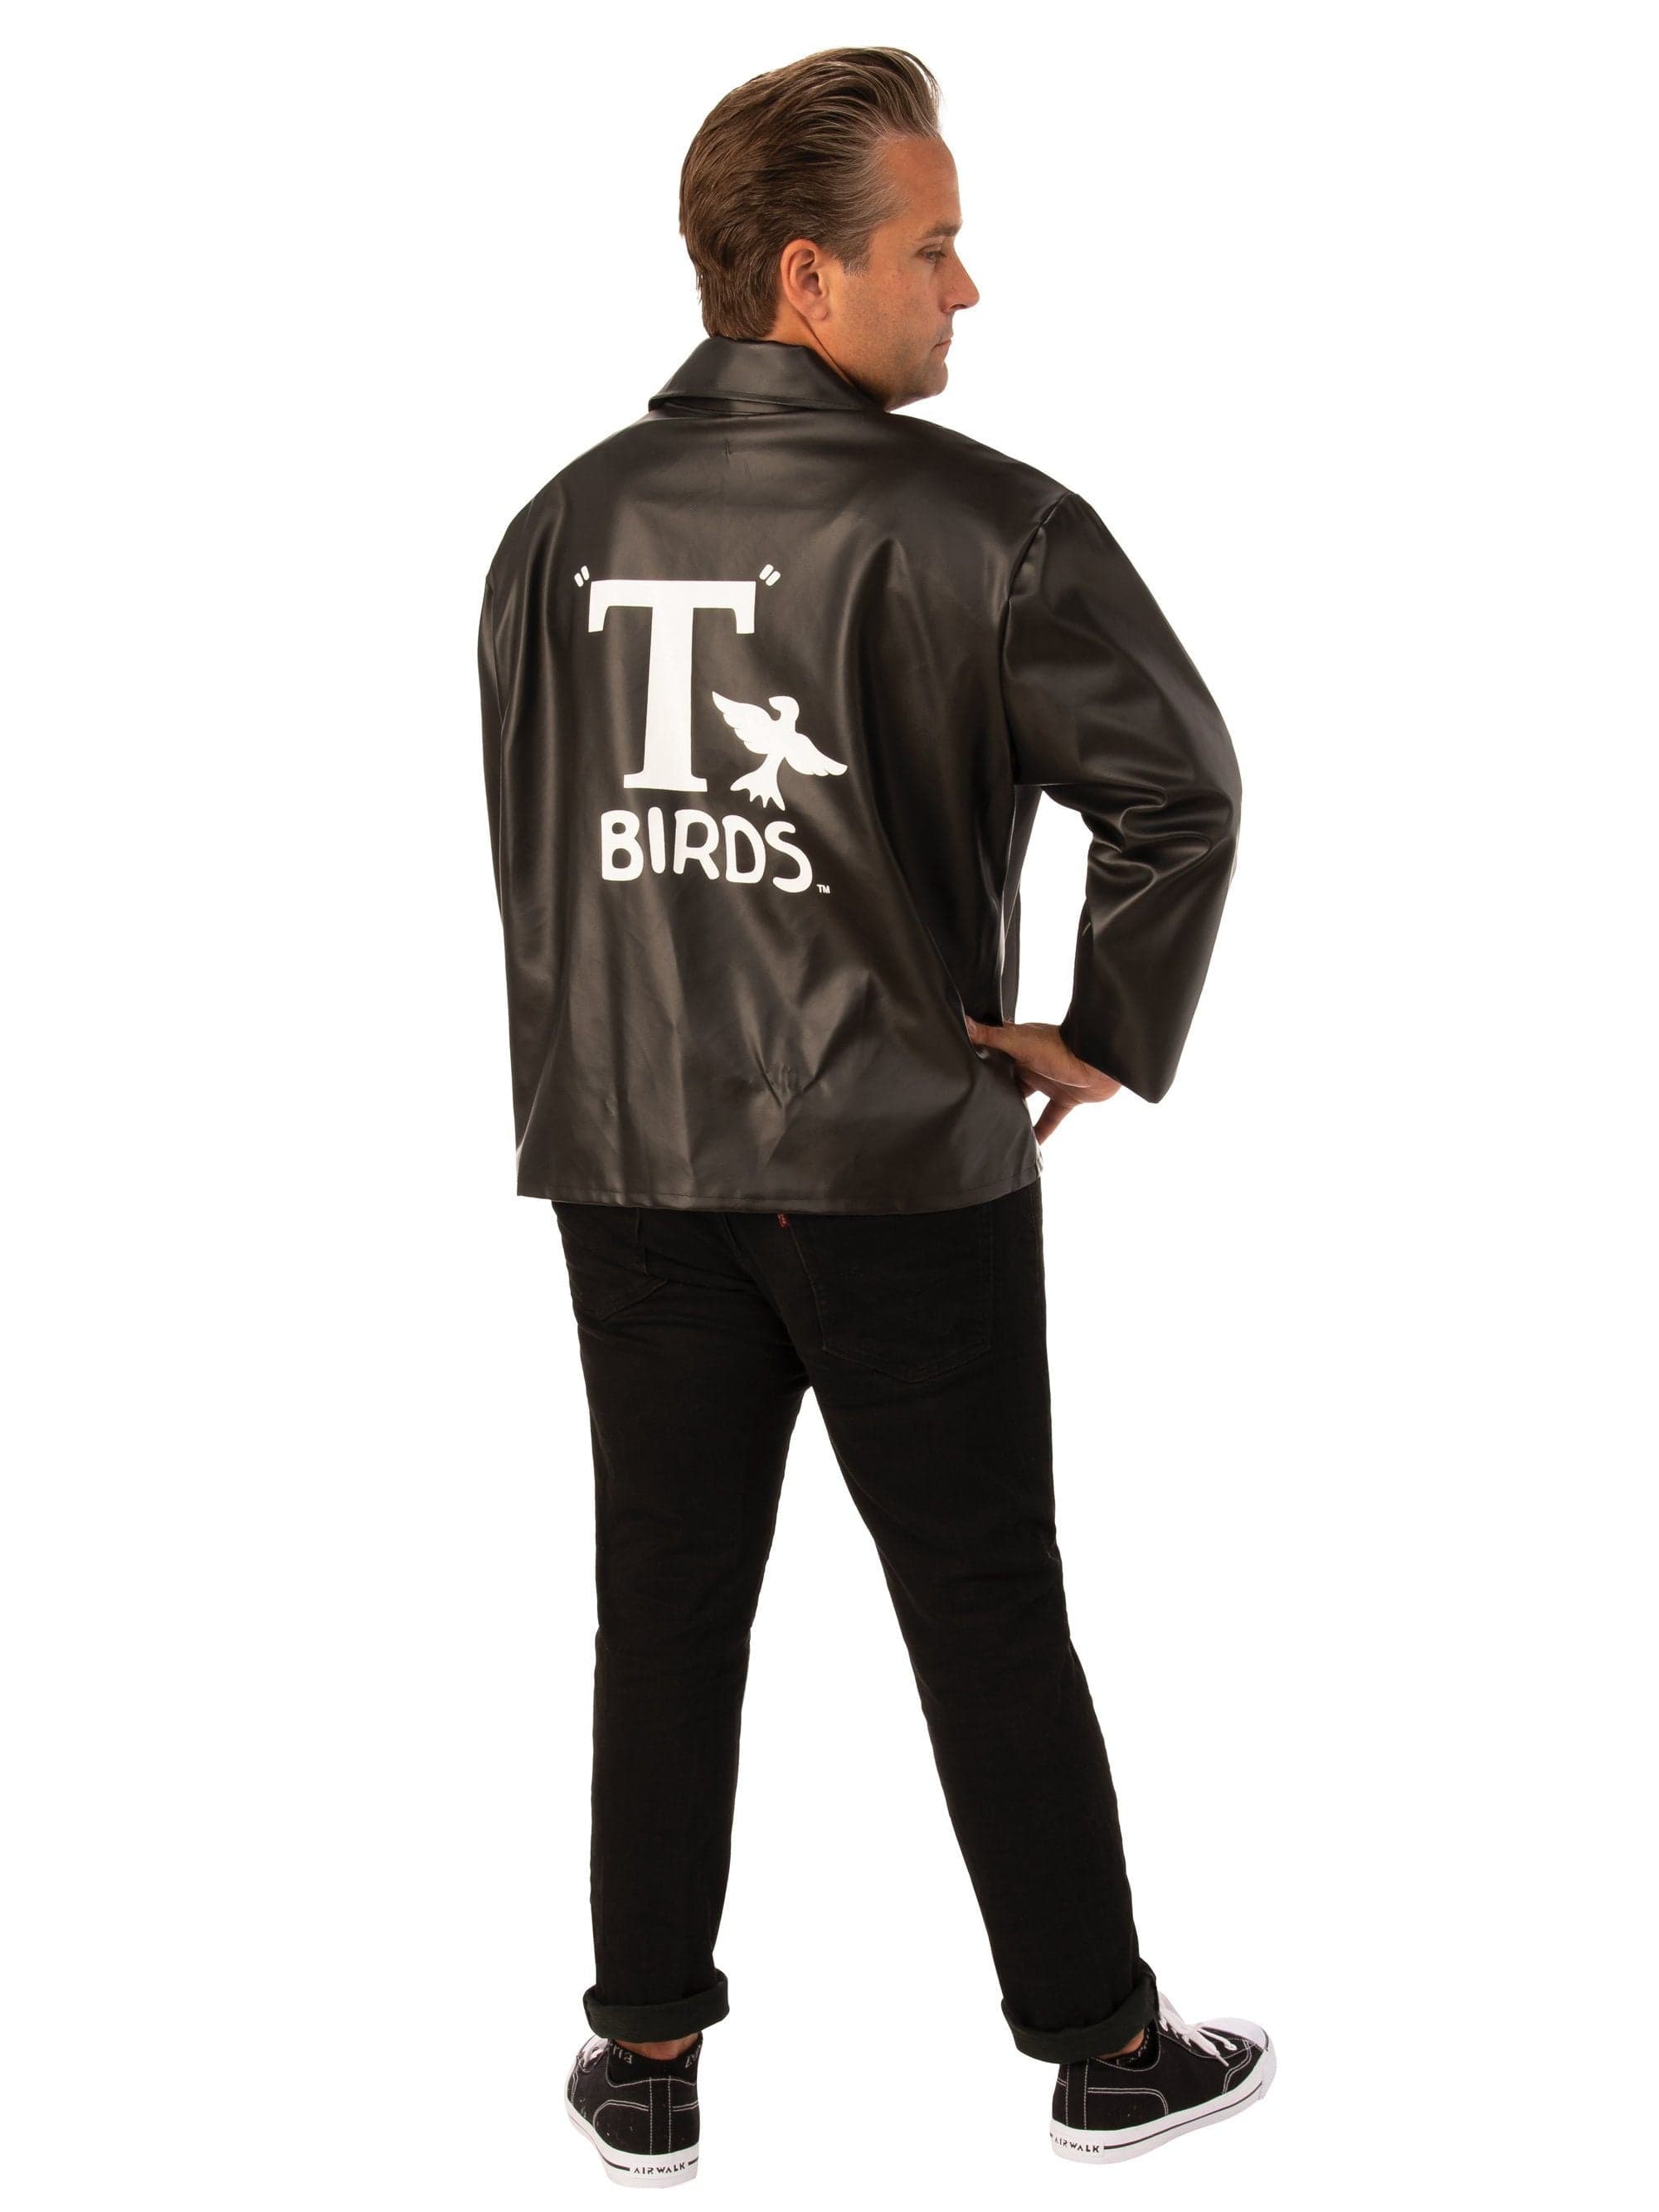 Adult Grease Plus Size Costume - costumes.com